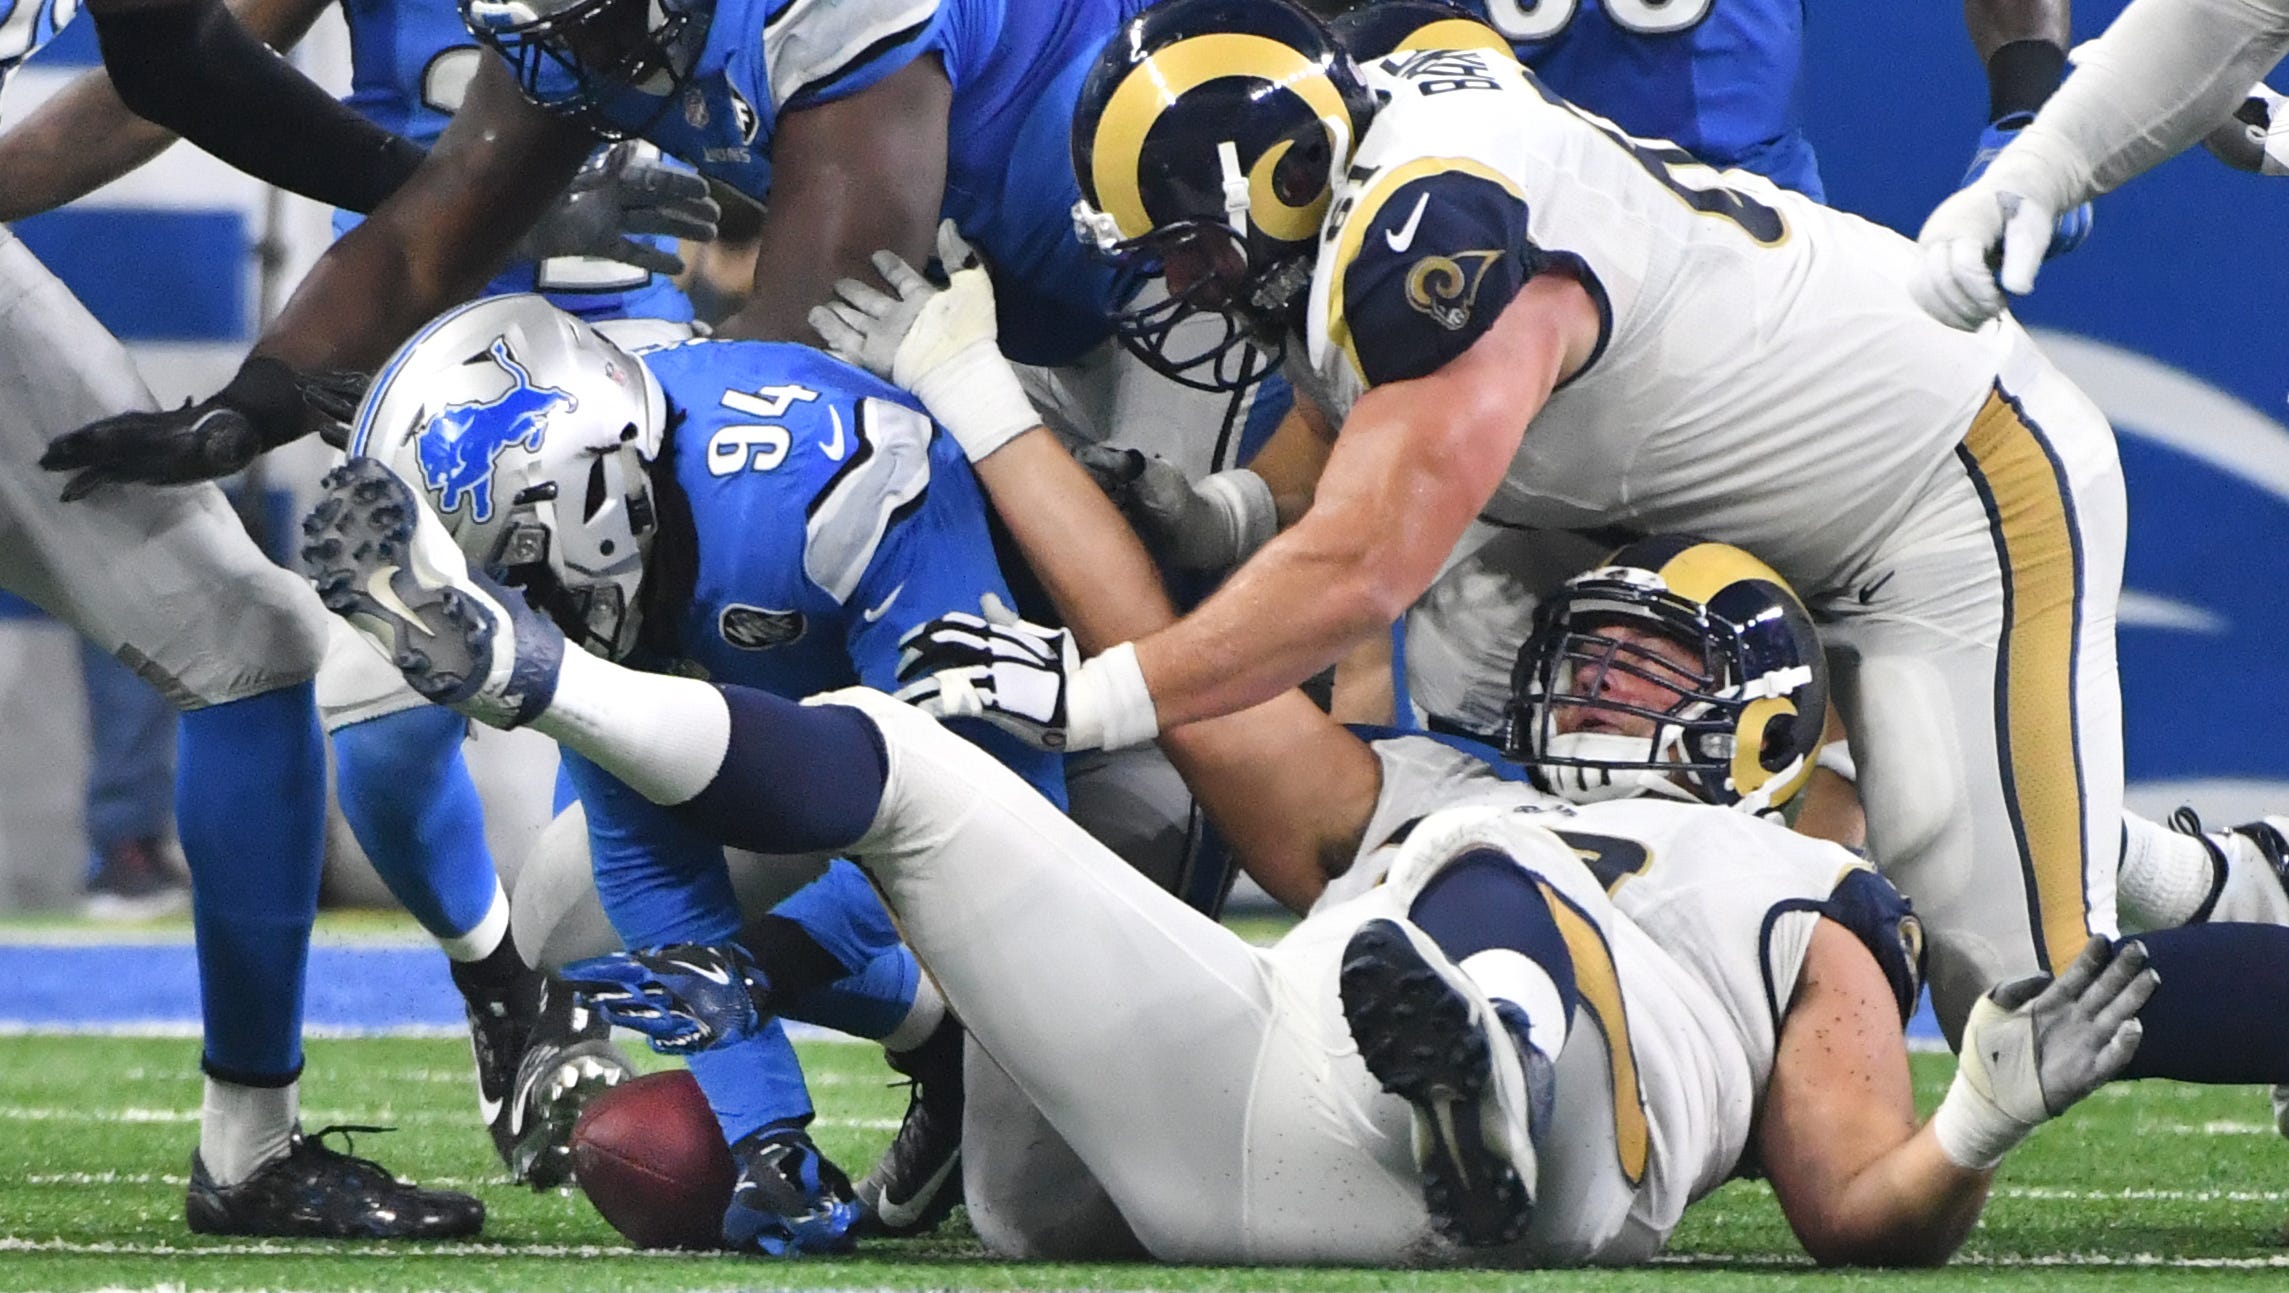 Lions defensive end Ziggy Ansah tries to recover a fumble by Rams quarterback Case Keenum, who ended up fighting back and recovering it in the second quarter.